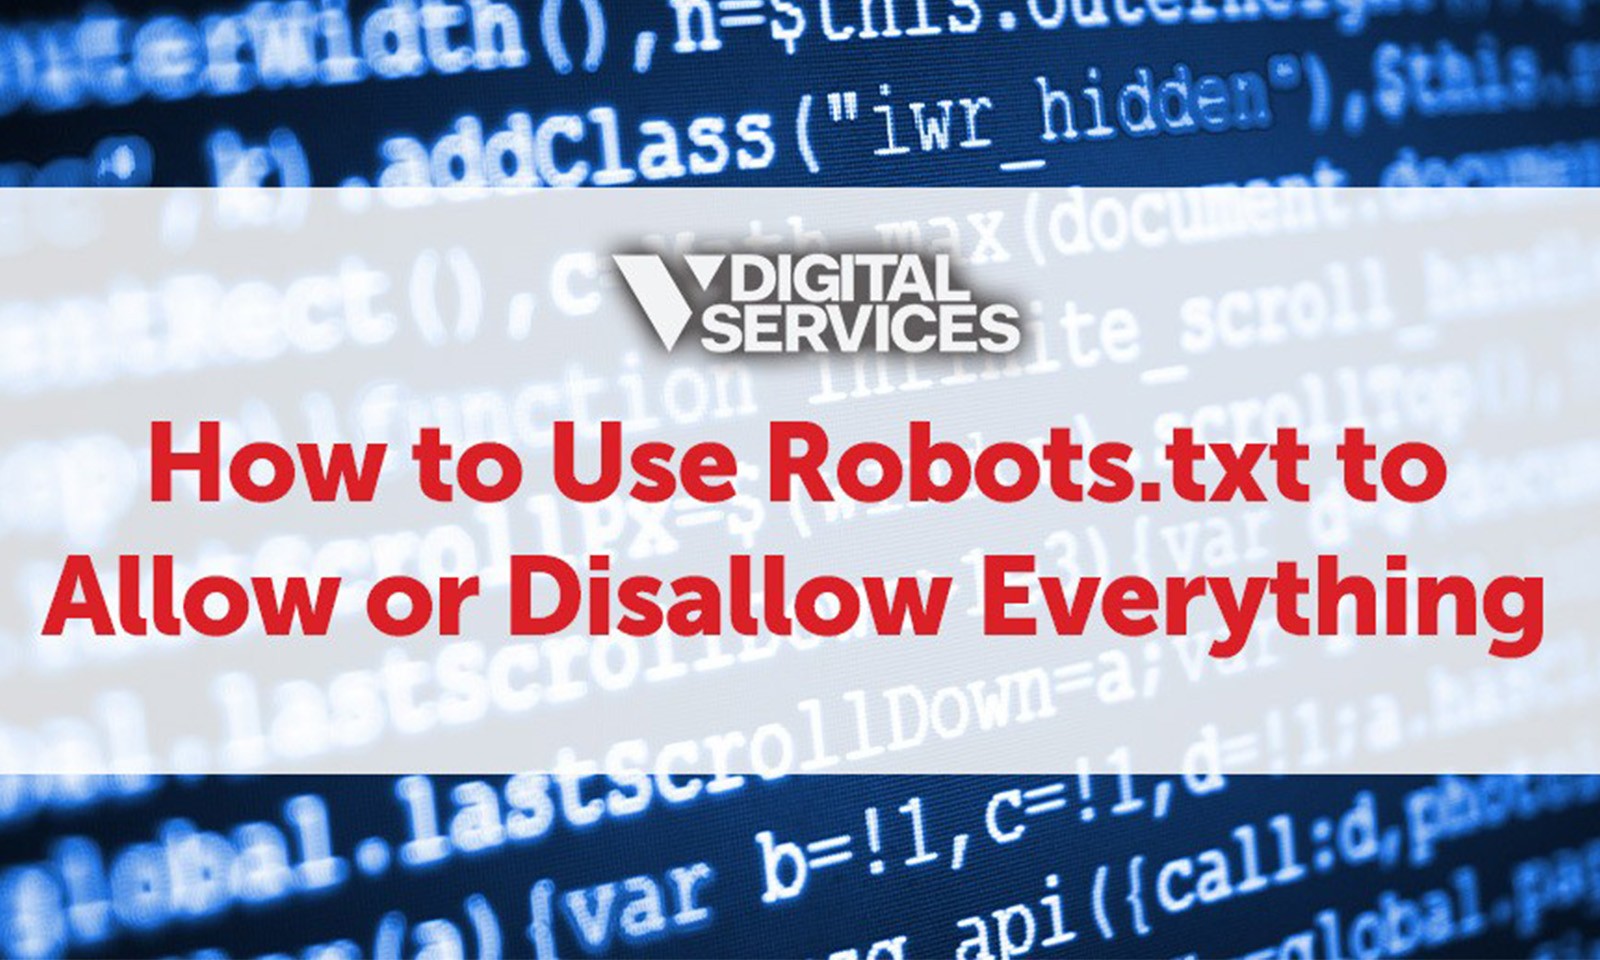 How to Use Robots.txt to Allow or Disallow Everything | Digital Services (VDS)